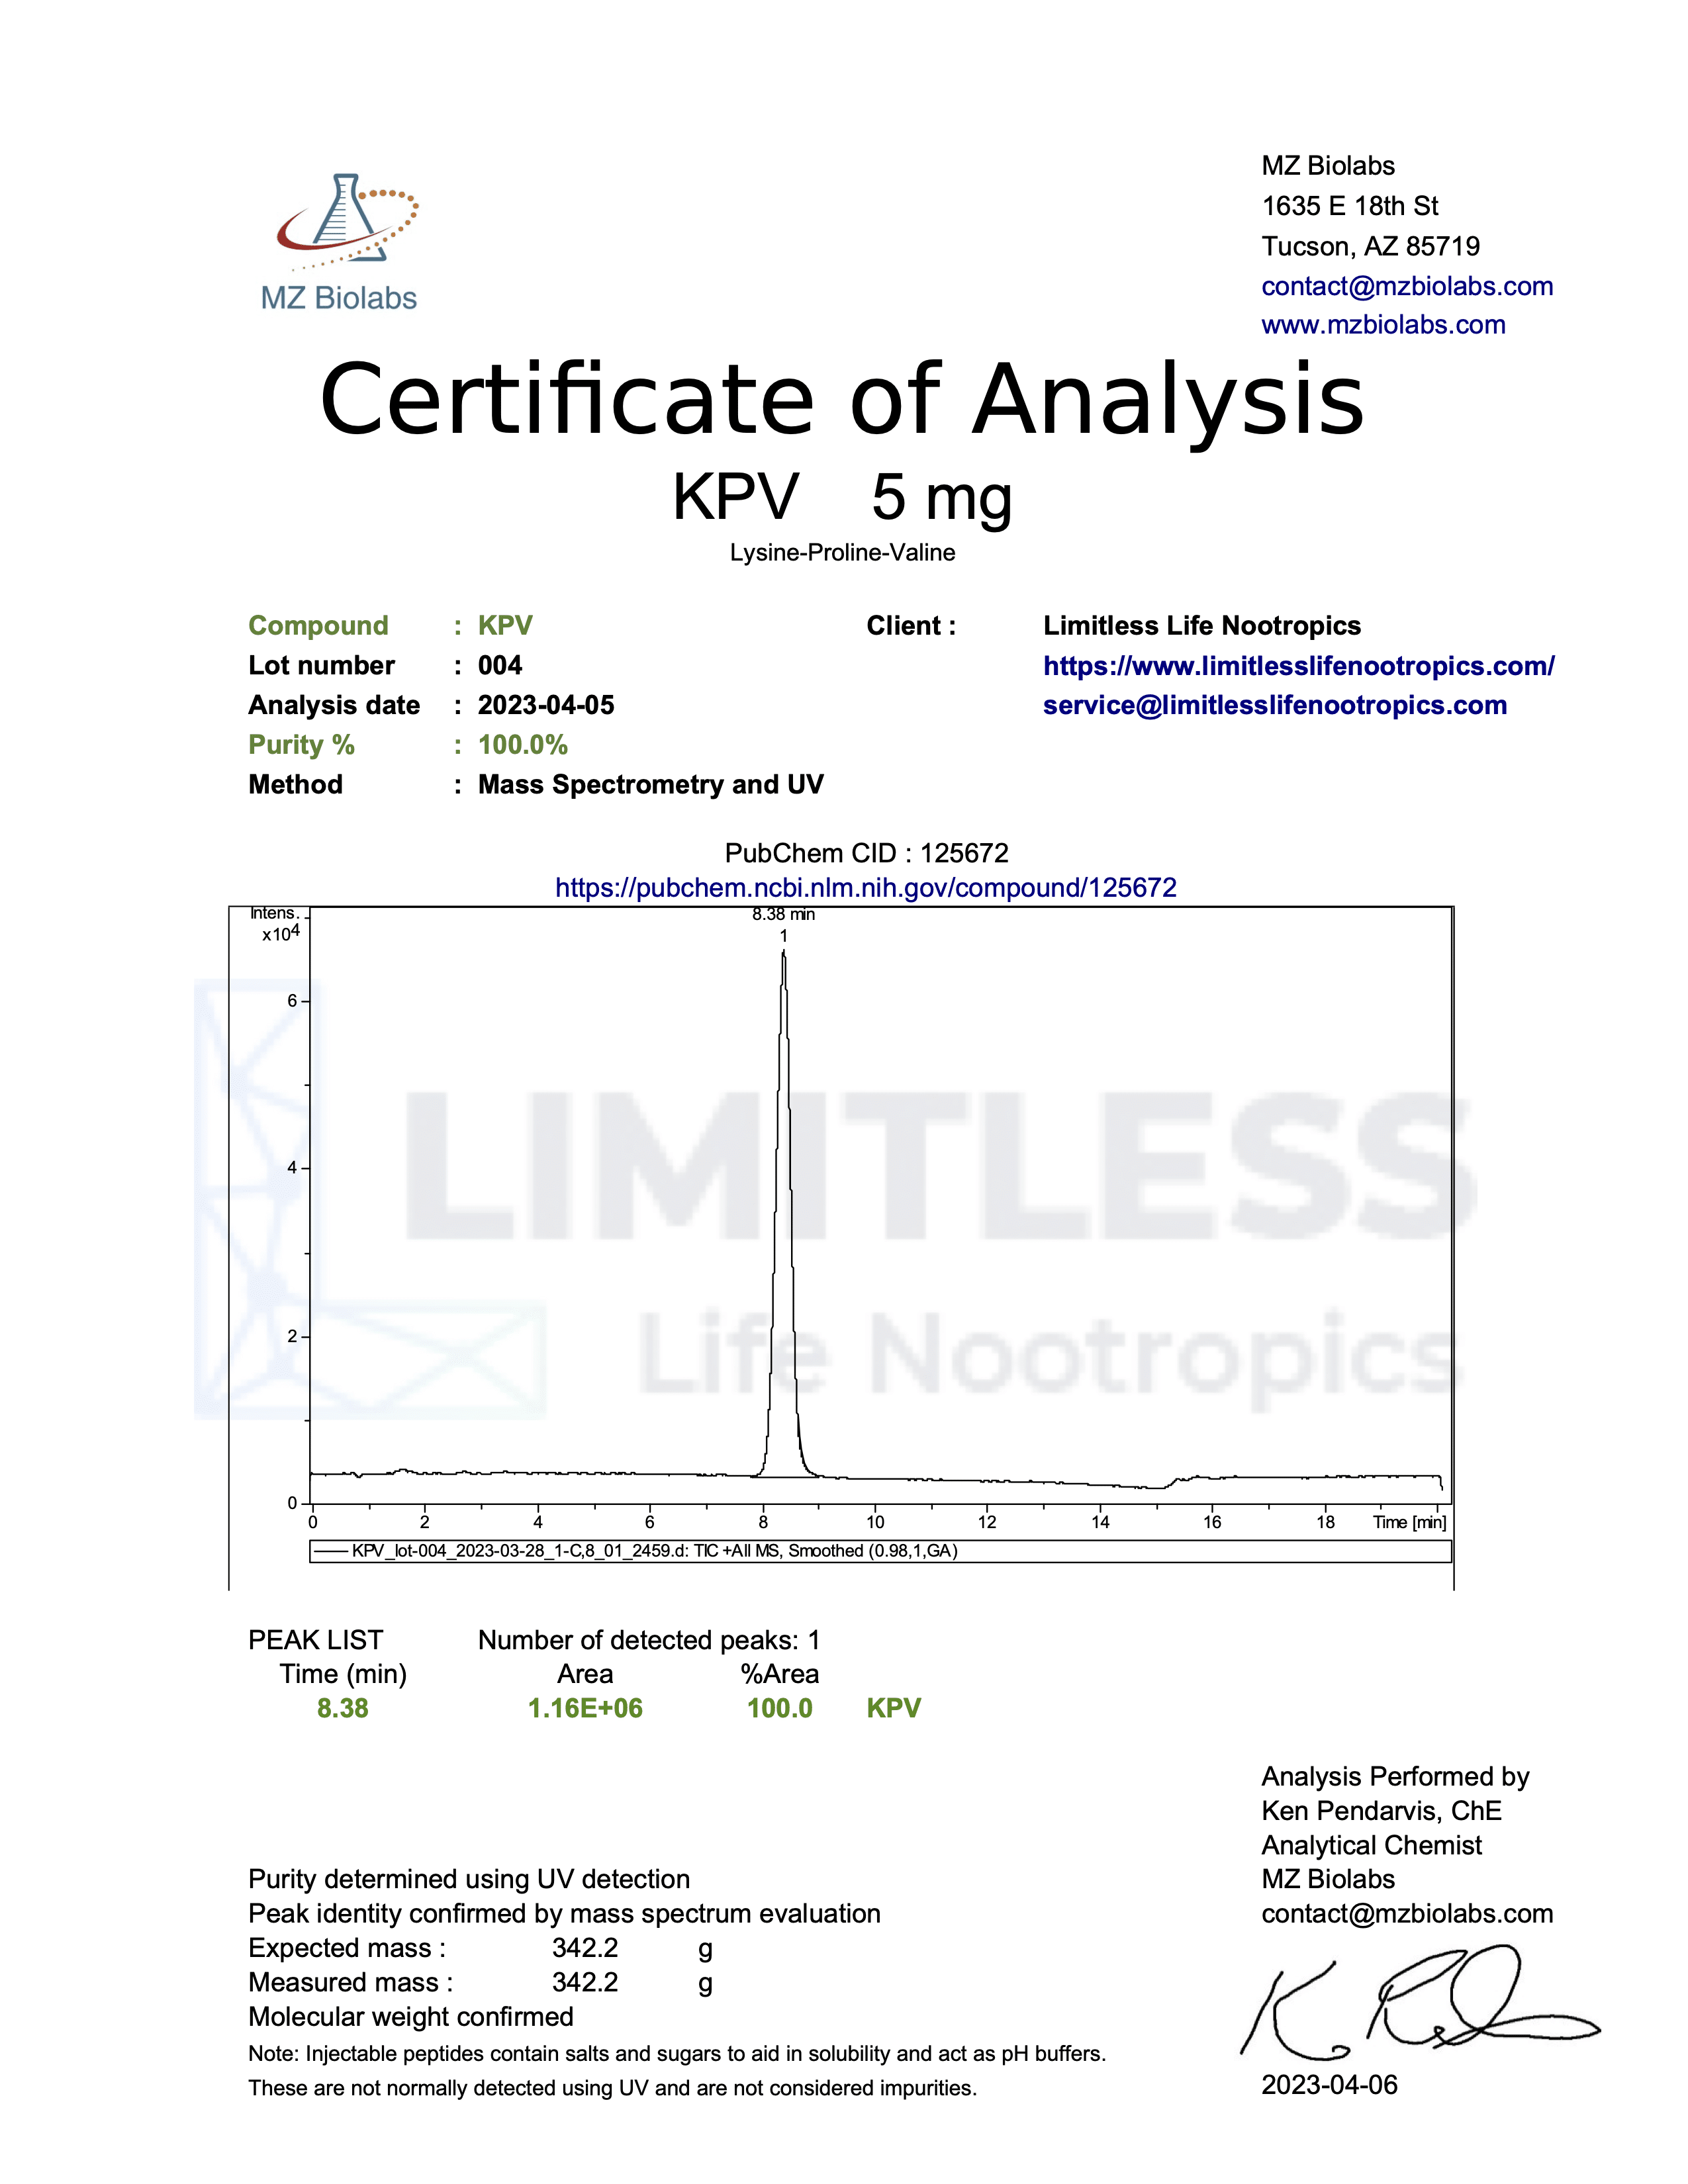 Certificate of Analysis for KPV